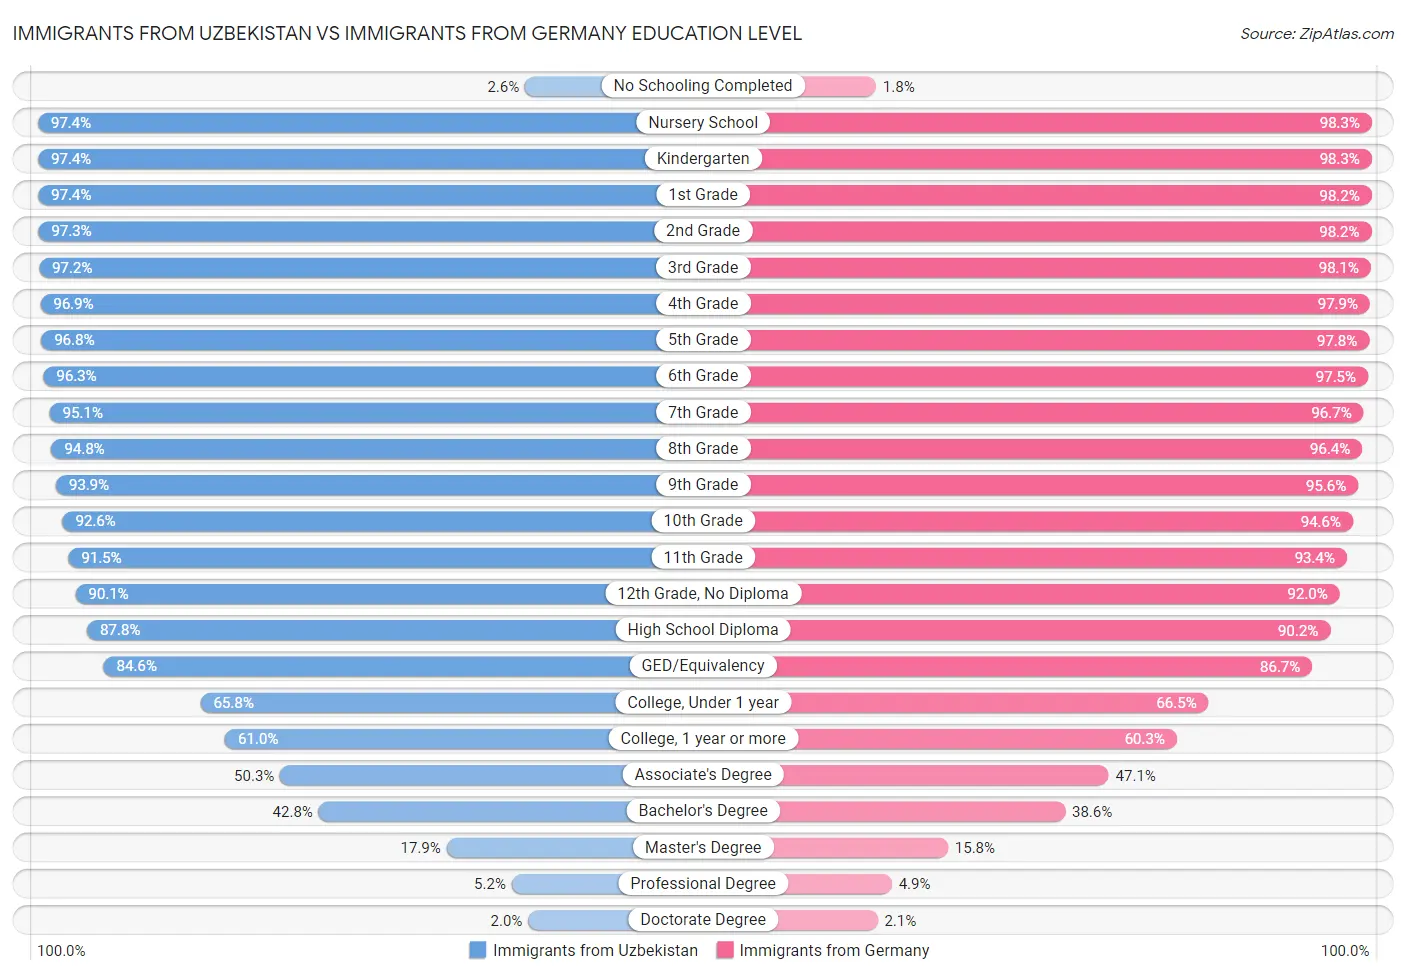 Immigrants from Uzbekistan vs Immigrants from Germany Education Level